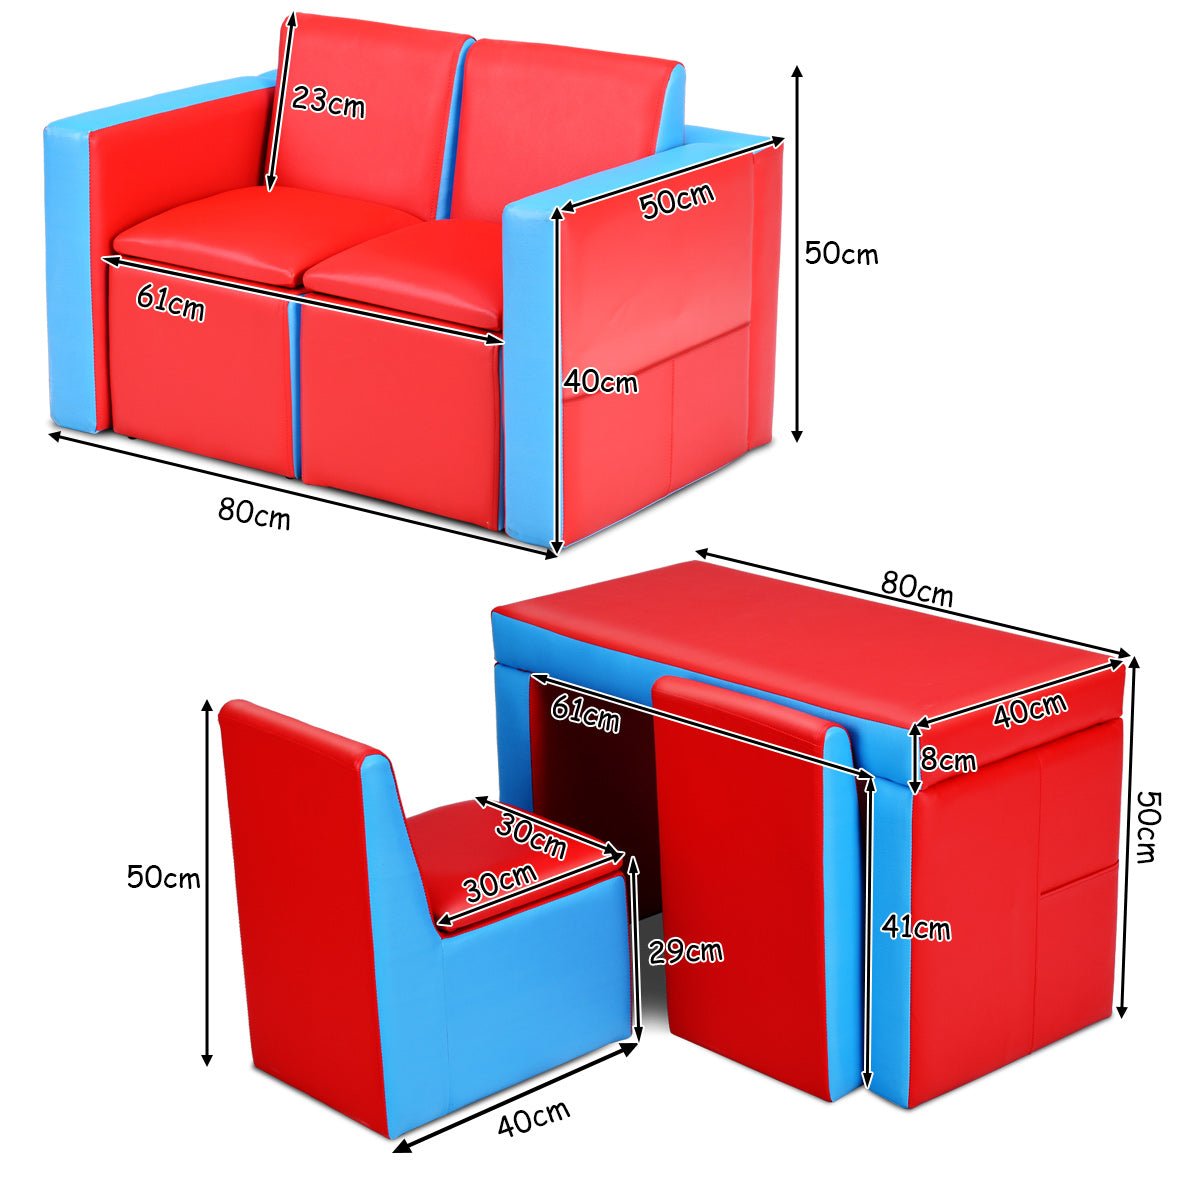 Kids Sofa with Wooden Frame and Storage - Cozy Seating with Smart Function